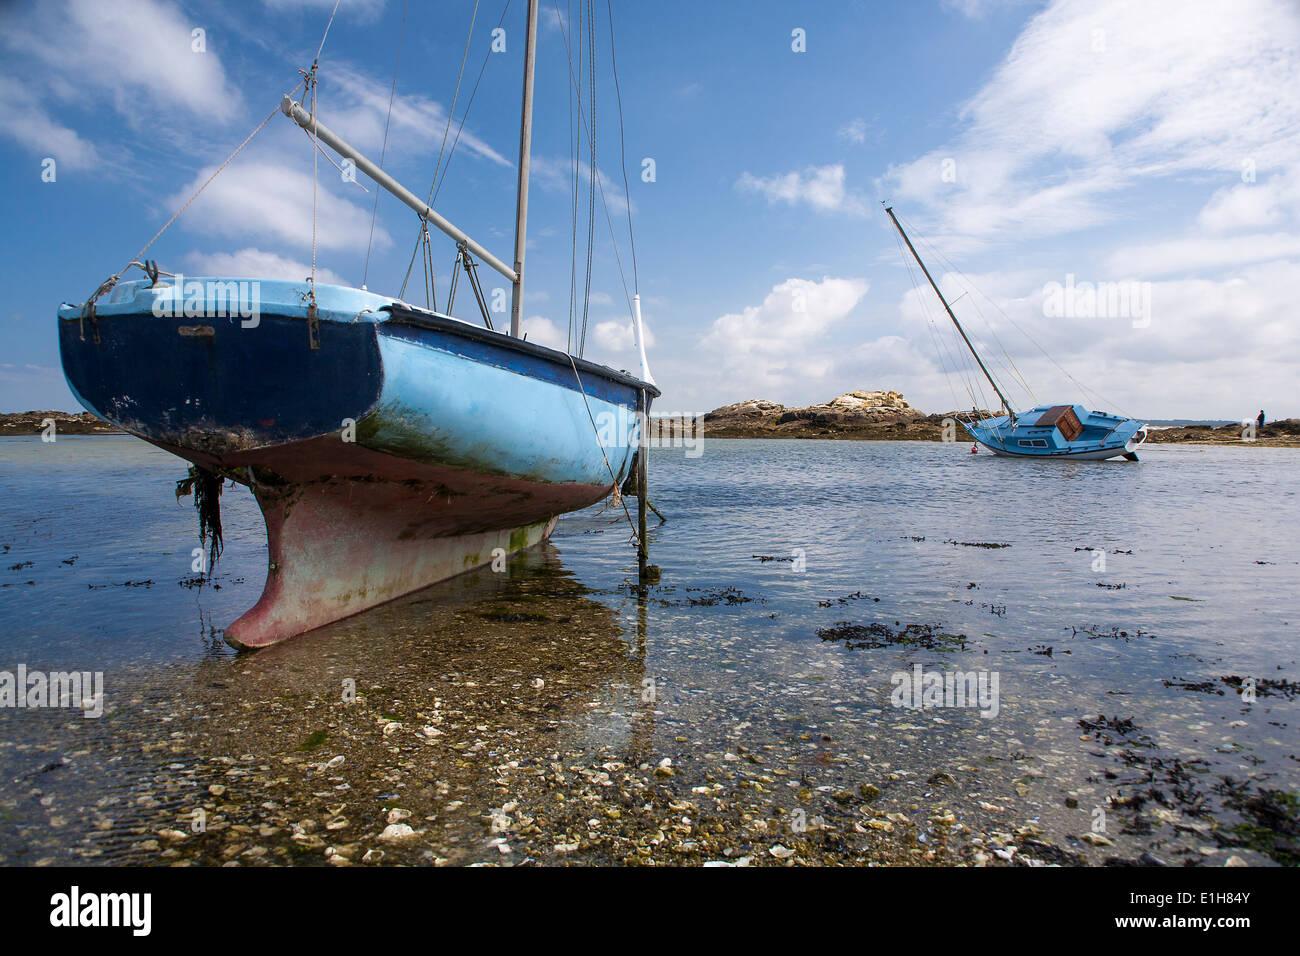 Yachts at low tide on the Cote Sauvage, Brittany, France. Stock Photo